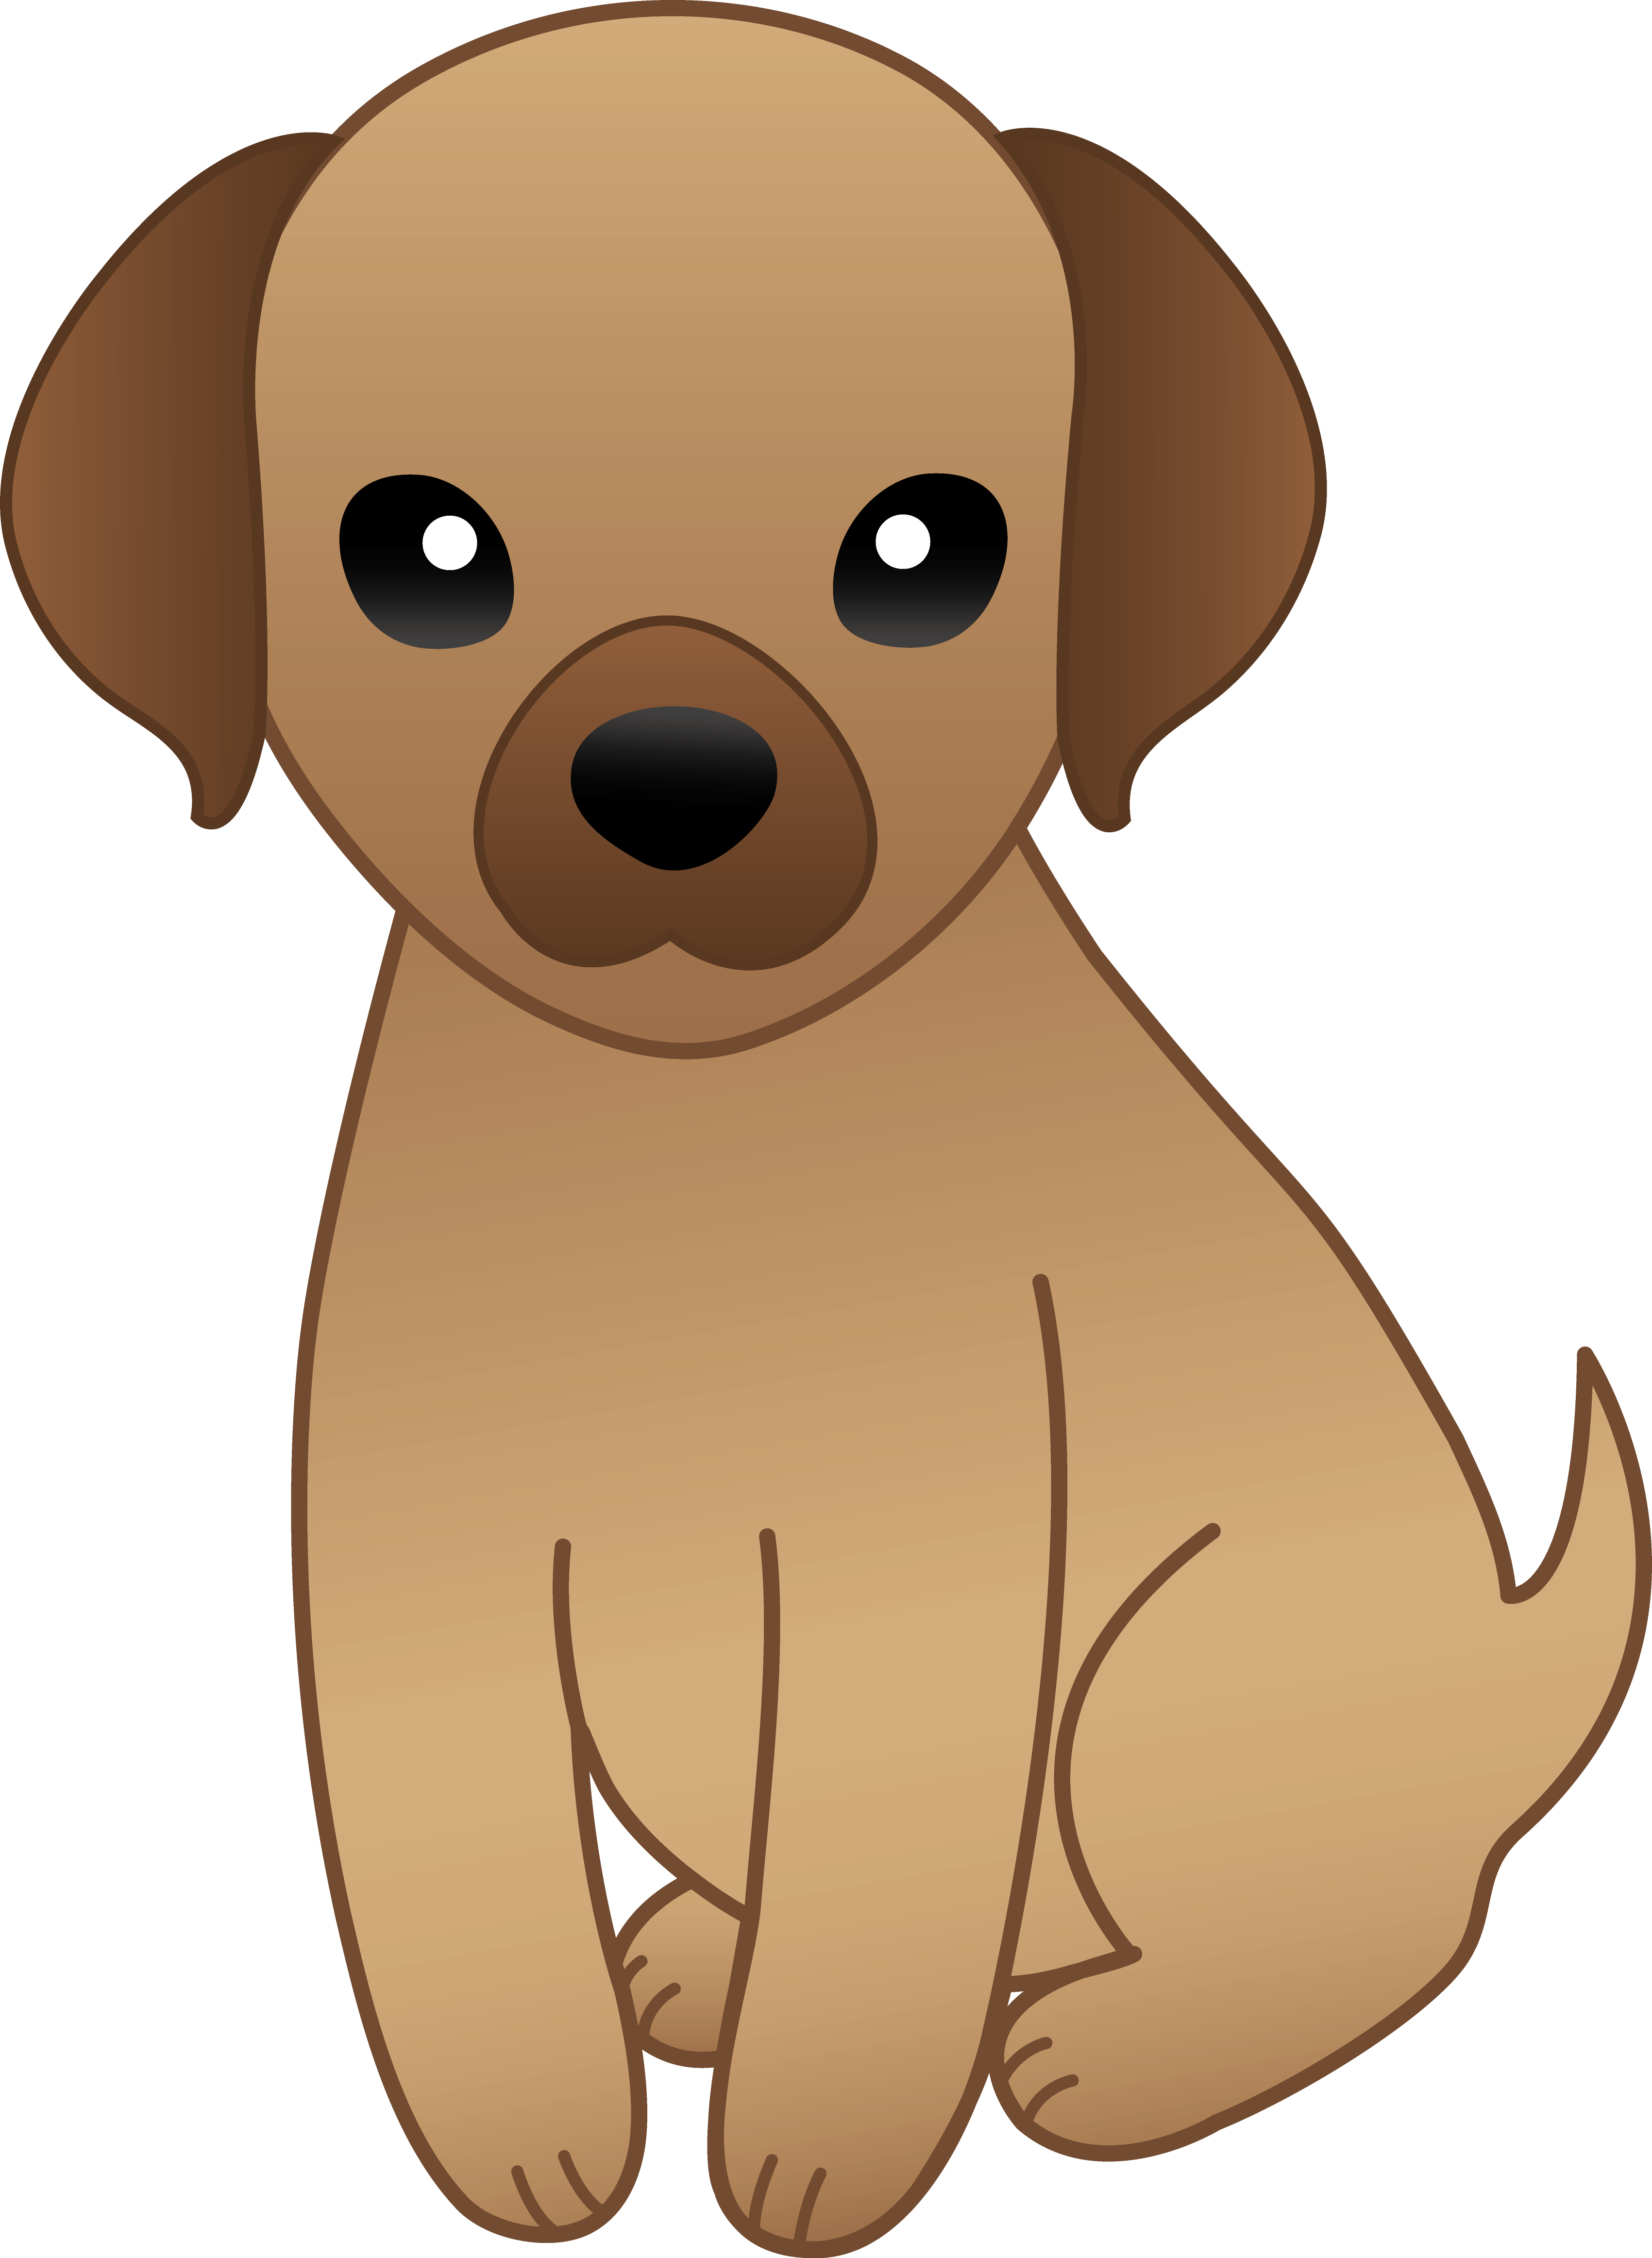 Cartoon Pictures Of Dogs And Puppies - purequo.com